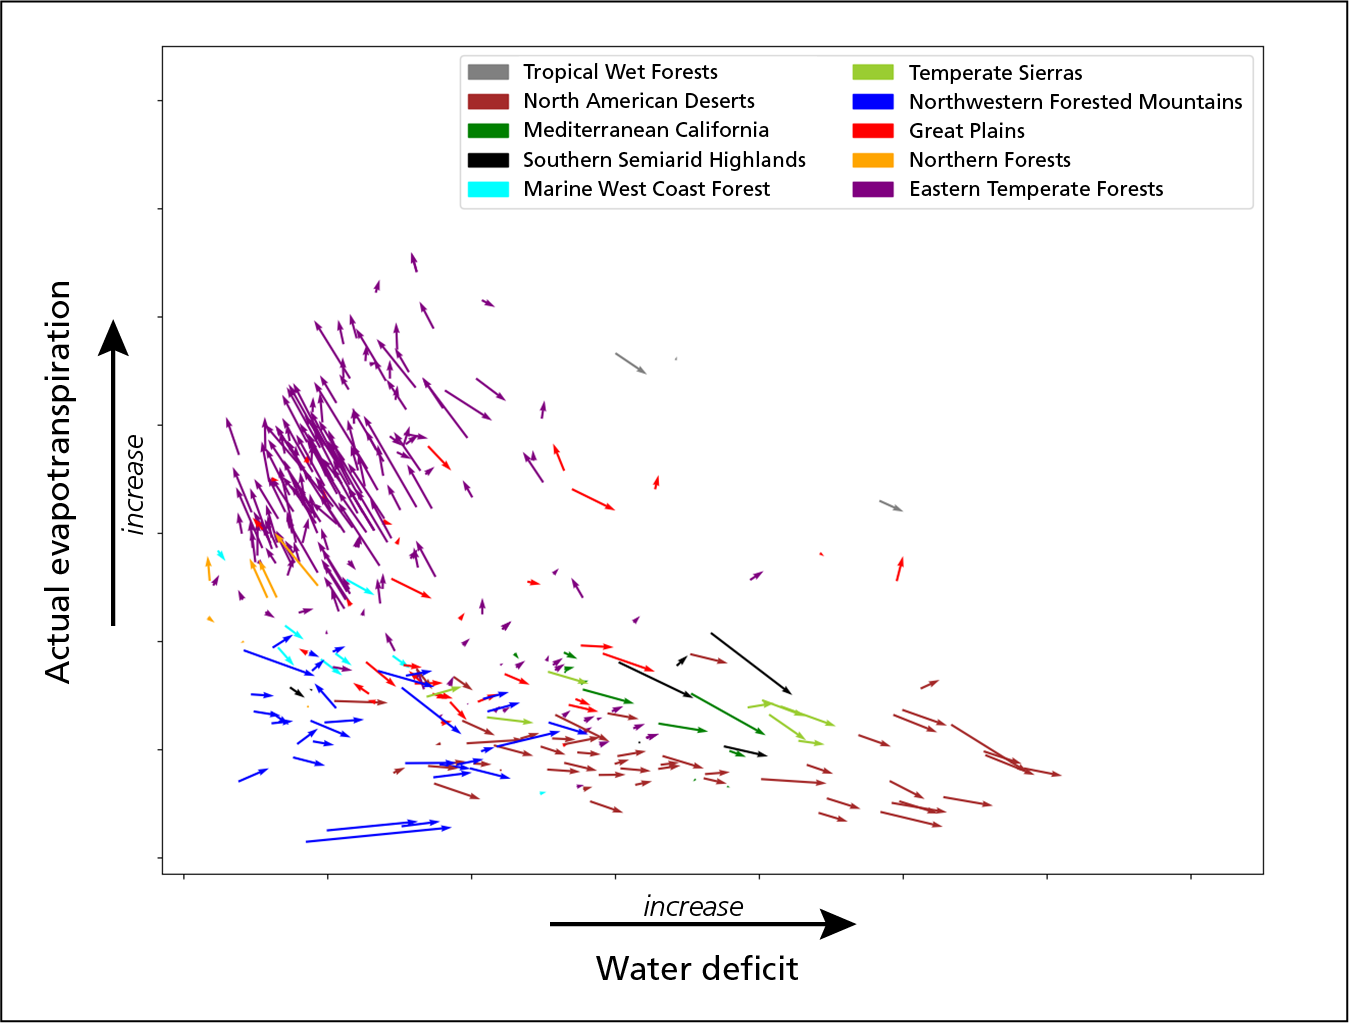 AET graphed against water deficit for different ecotones representing trend change in national parks.